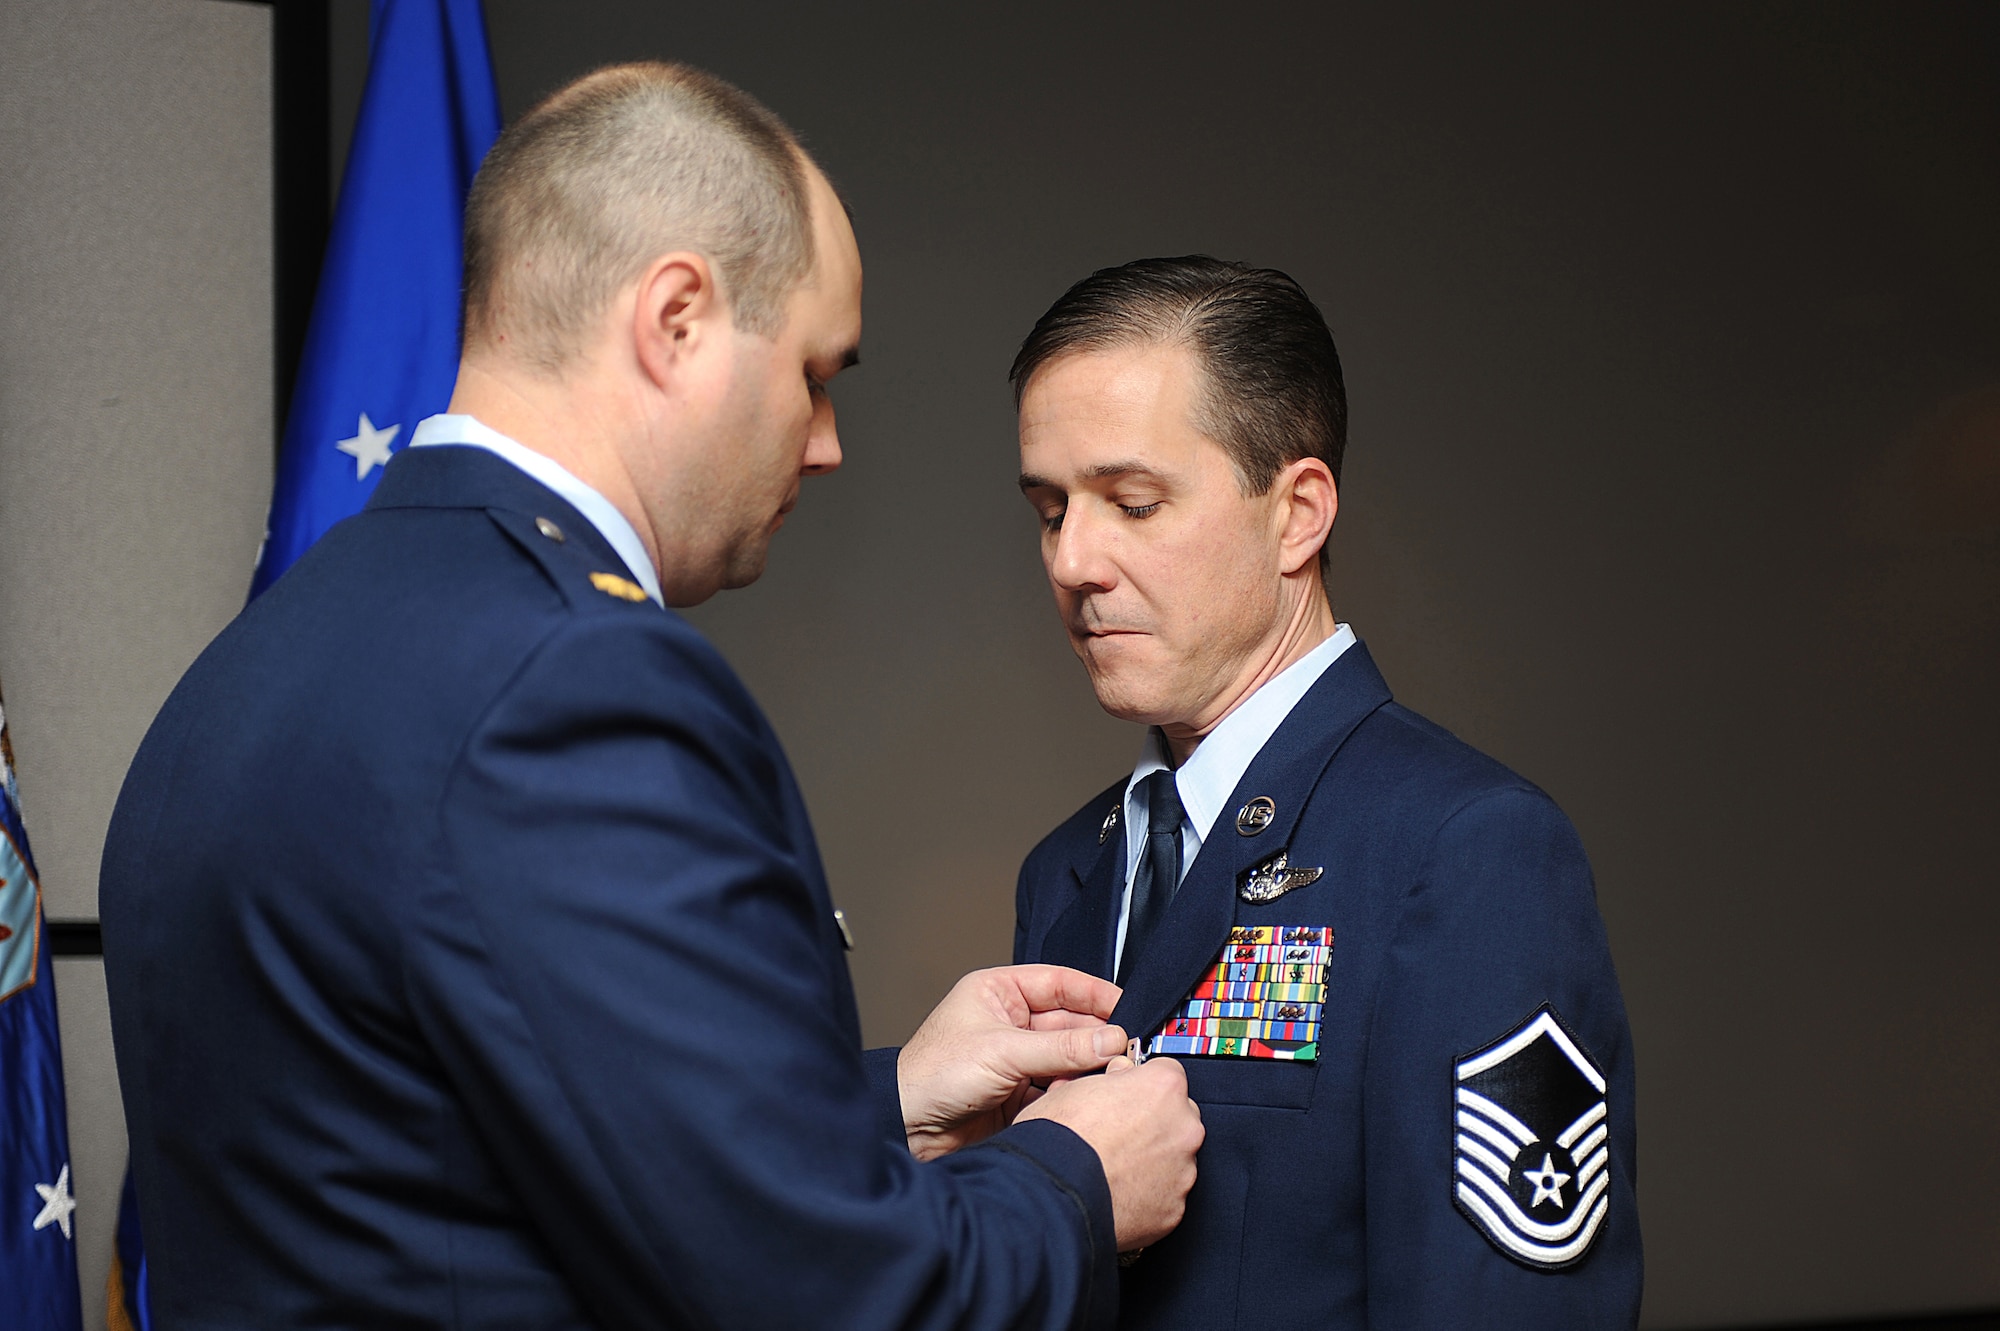 Maj. Robert Barager, Expeditionary Operations School, pins the Meritorious Service Medal on Master Sgt. Peter Richardson during his retirement ceremony in the U.S. Air Force Expeditionary Center on Fort Dix, N.J., Jan. 9, 2009.  Sergeant Richardson was a command tactician for the Combat Aircrew Tactics Studies Course.  He was then selected to fulfill the position of course director for the CATS Course in his last years at the Expeditionary Center. (U.S. Air Force Photo/Staff Sgt. Nathan Bevier)